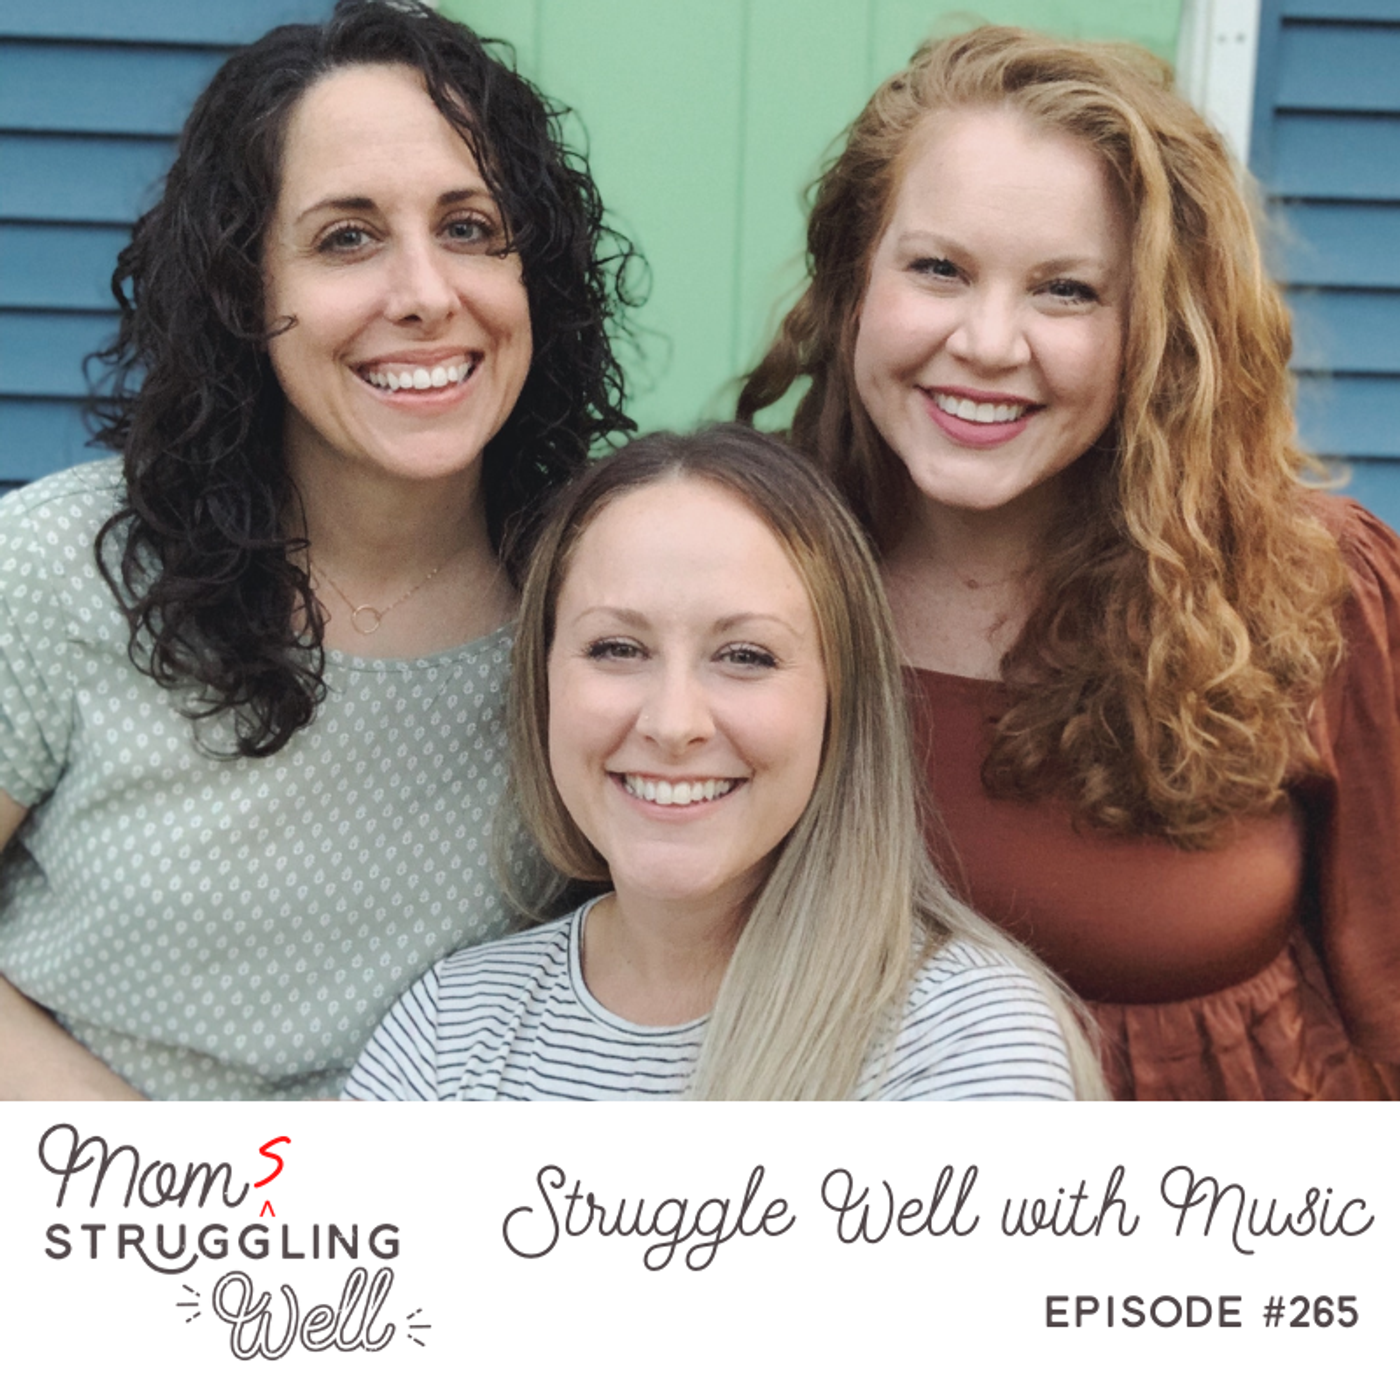 #265: Struggle Well with Music